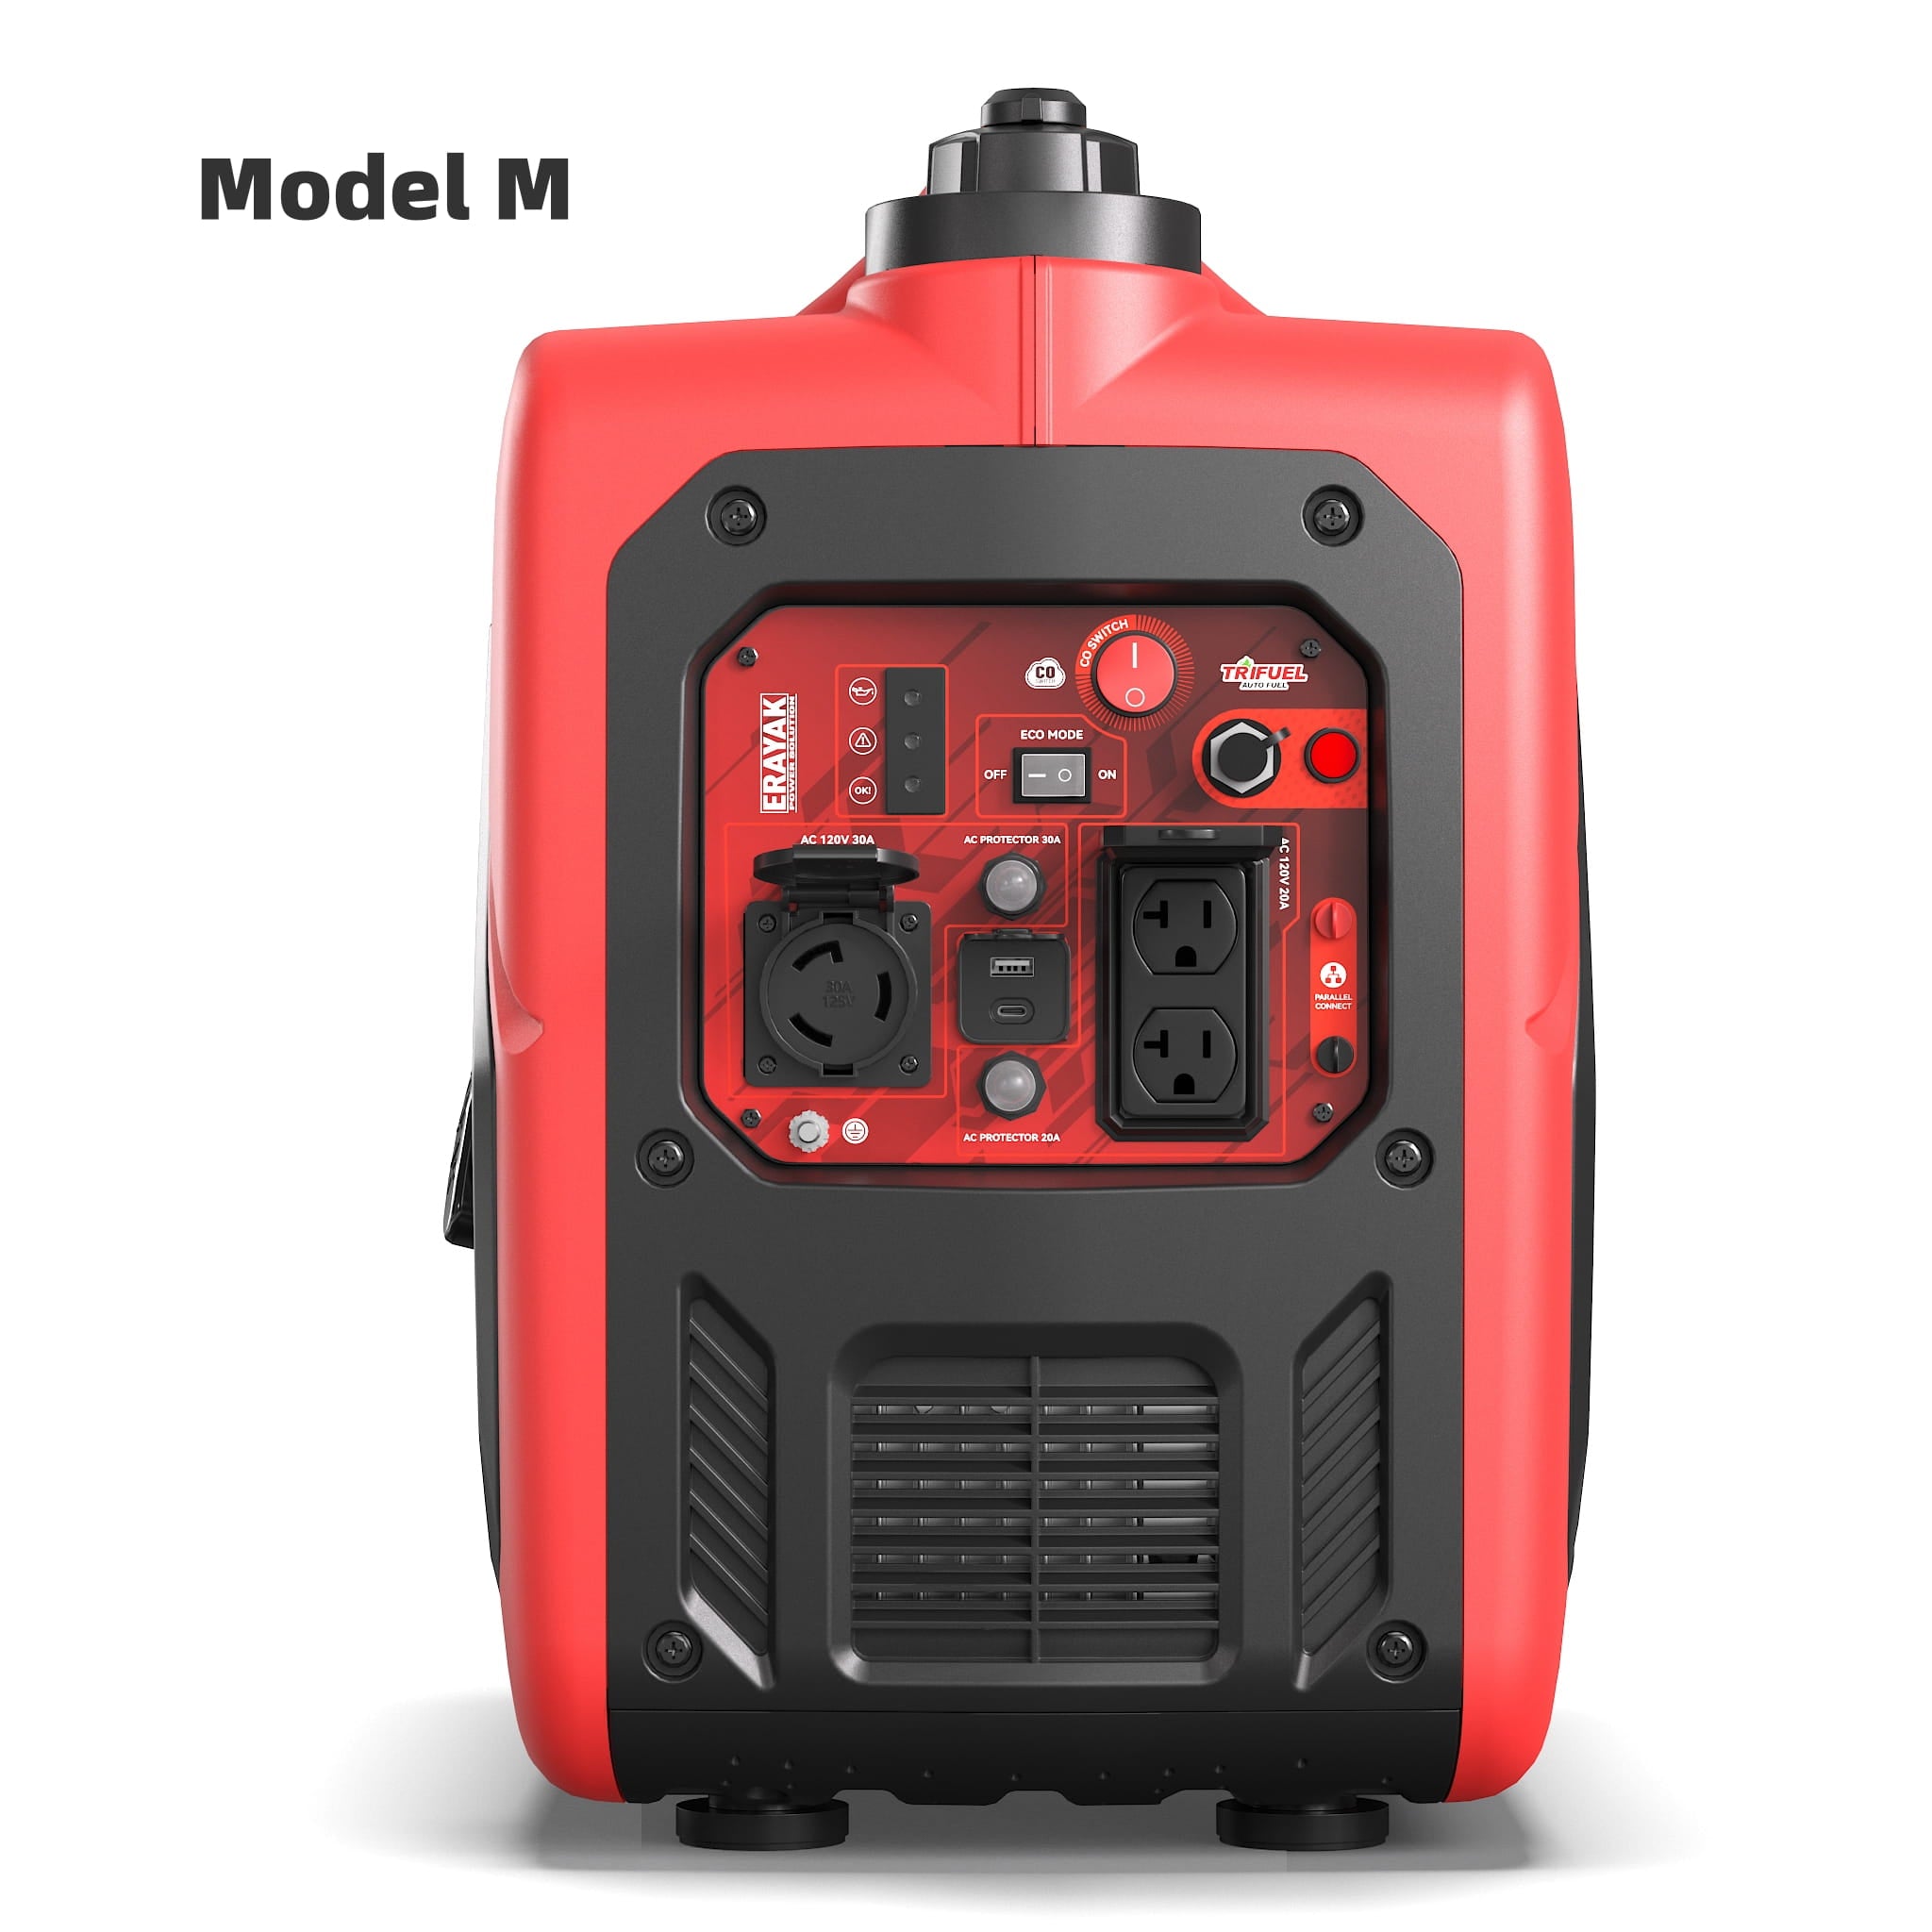 Erayak Portble Inverter Generator 4500W, Tri-Fuel, Dual-Fuel, 30A Outlet, Super Quiet, For RV, Camping & Home, EYG4500PD